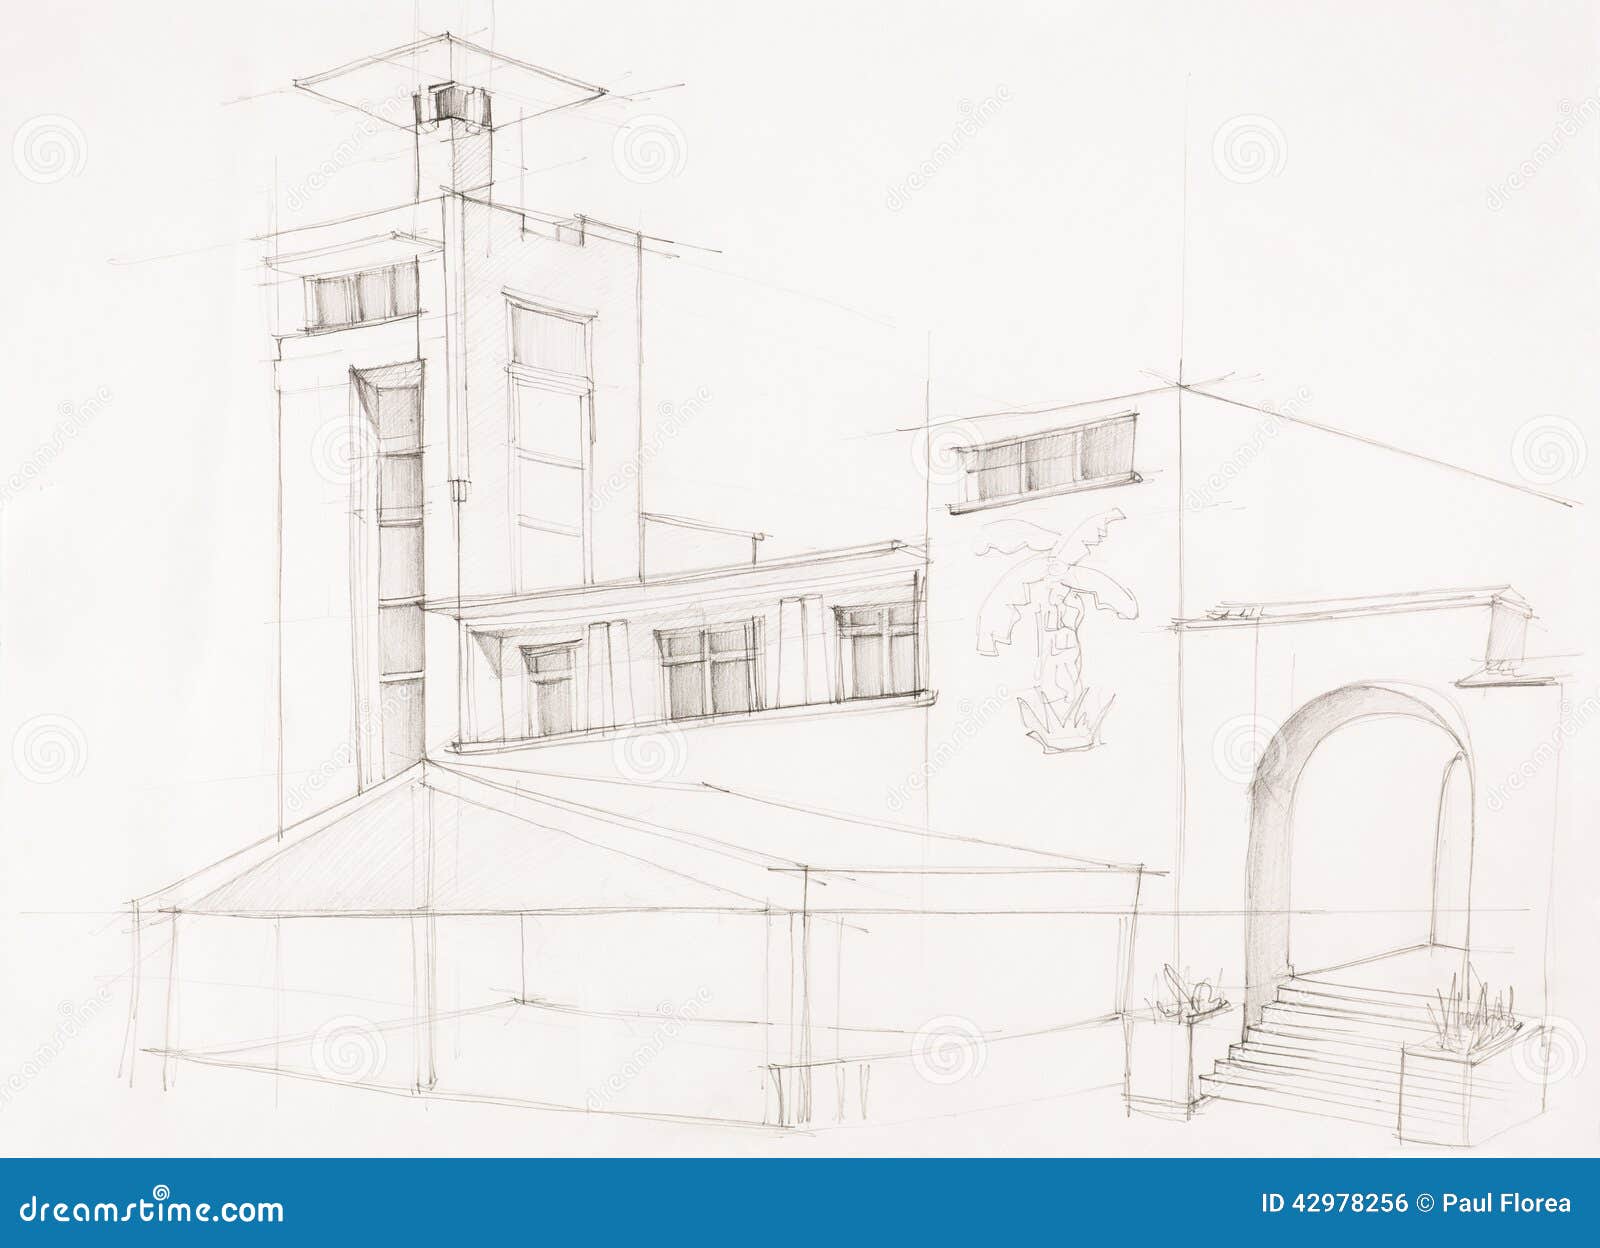 Details 171+ b arch drawing